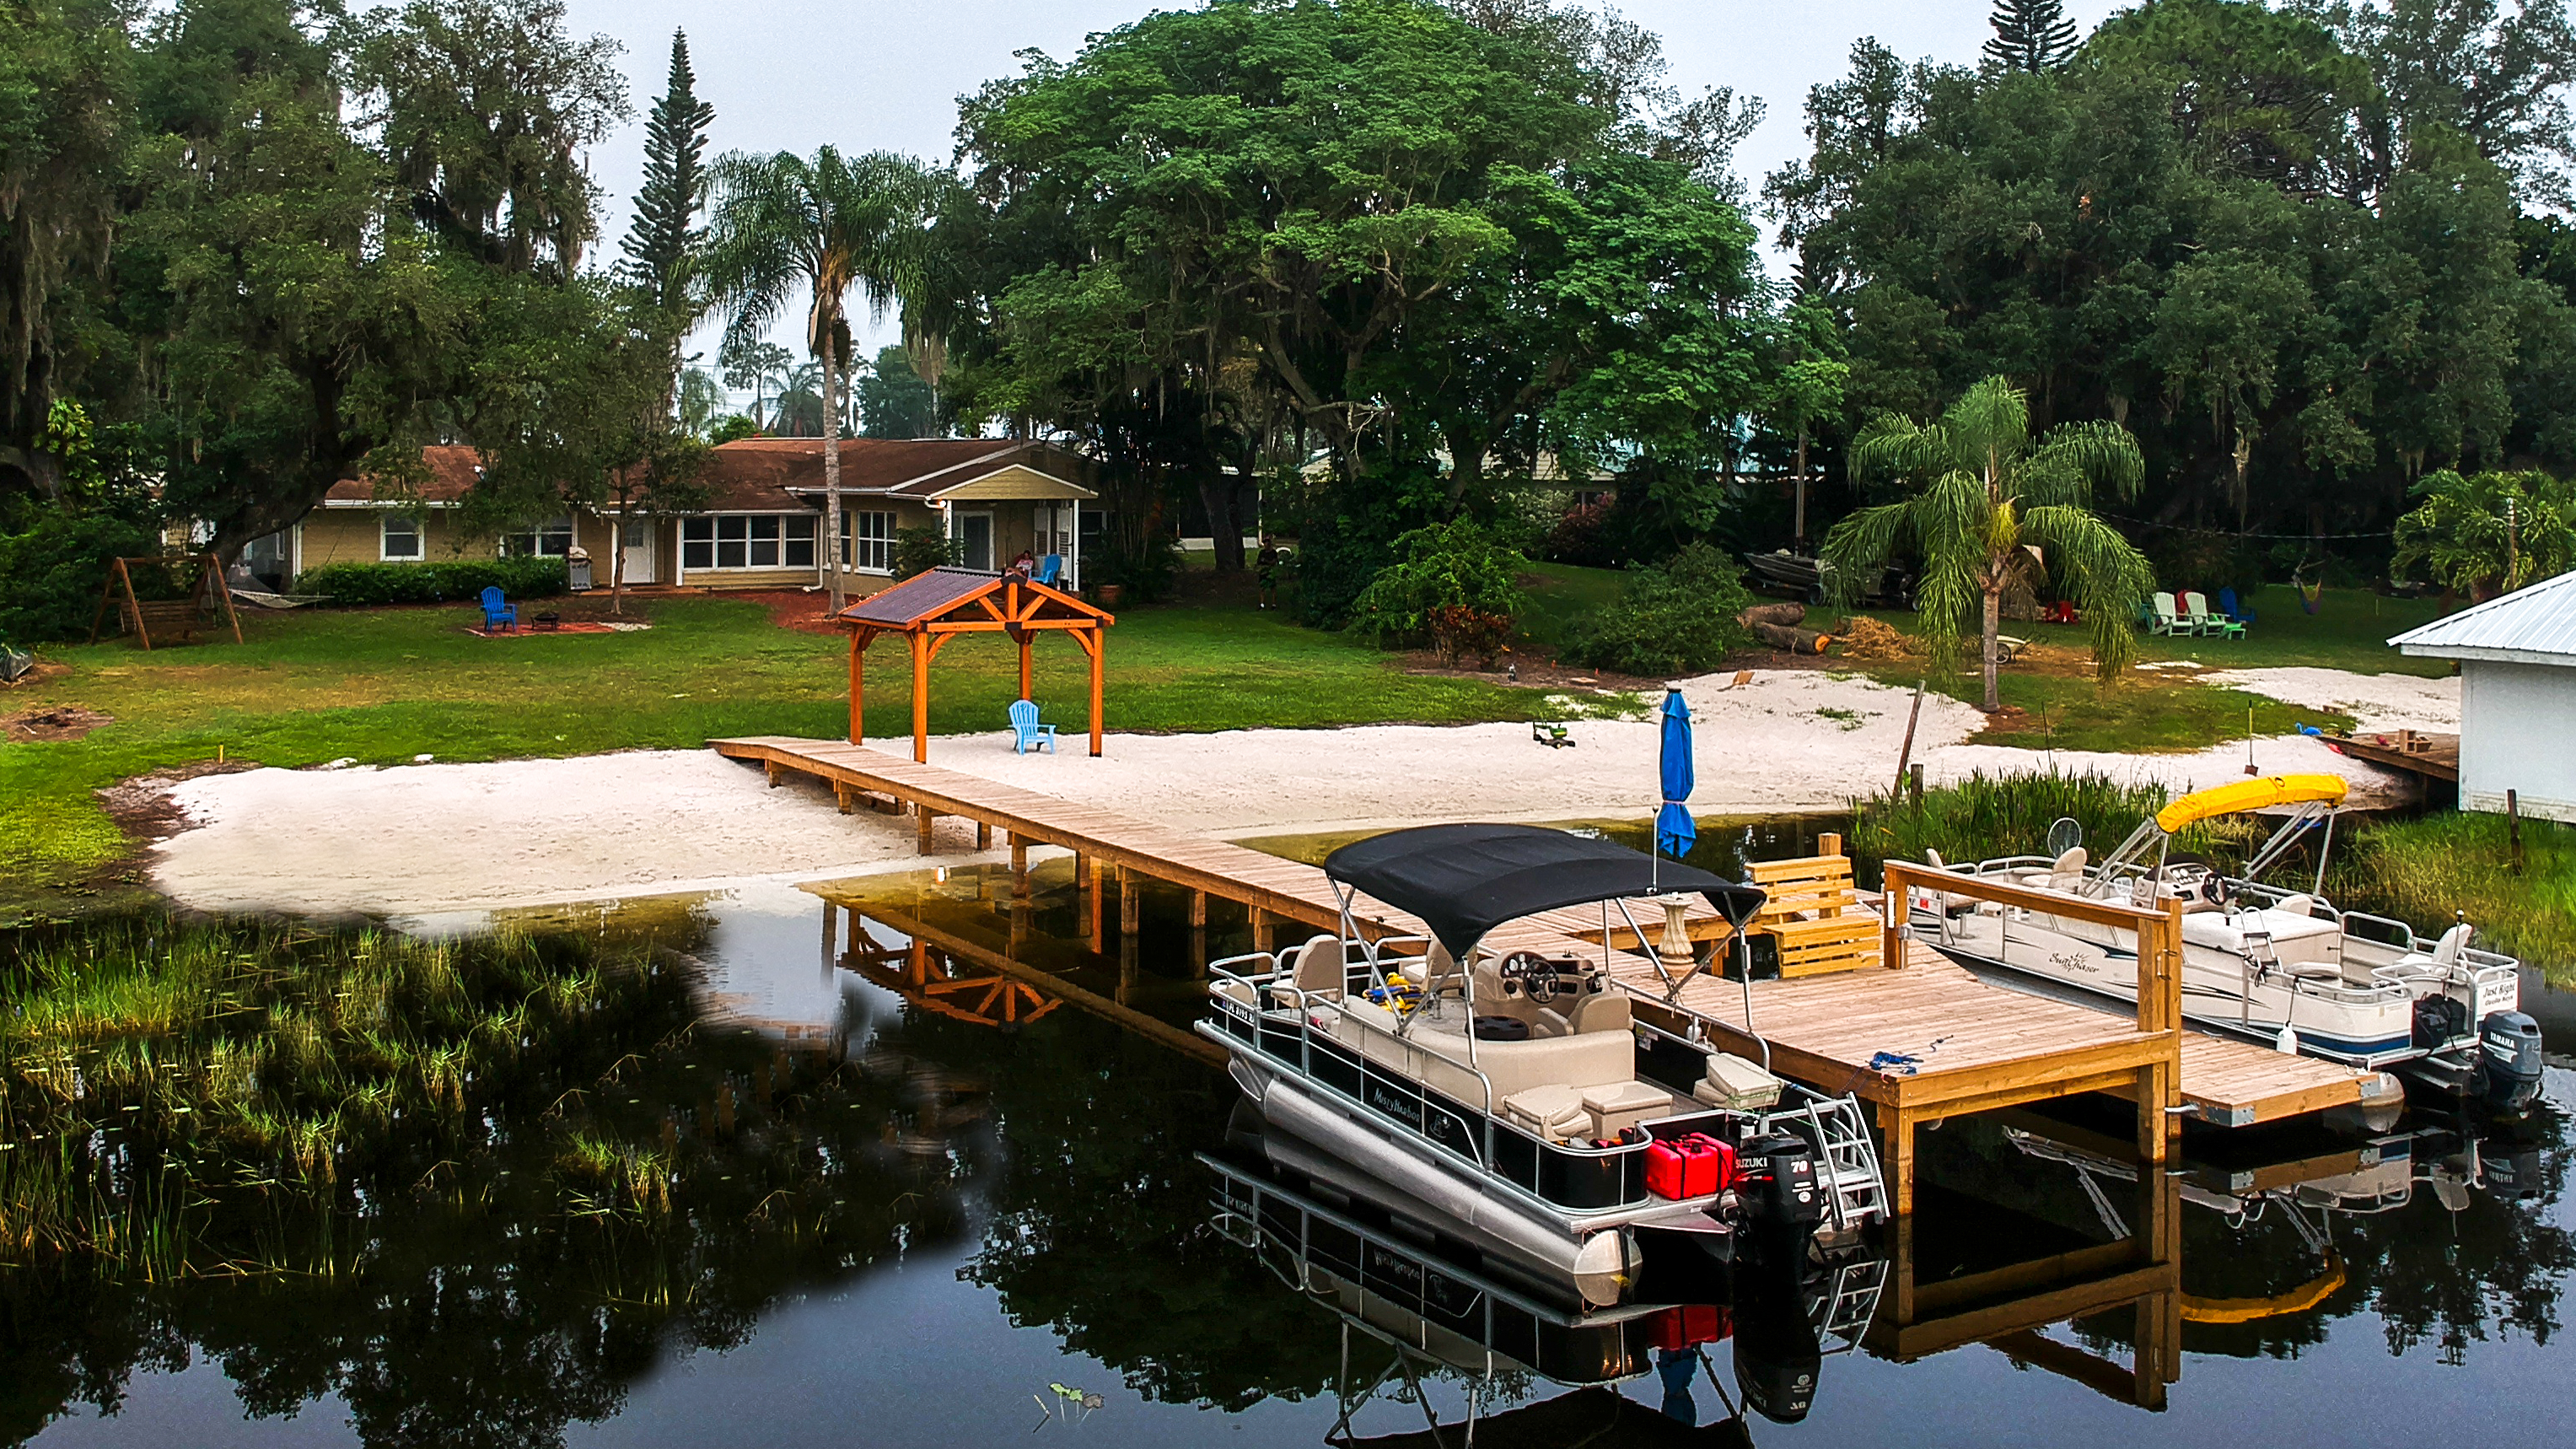 Bring your boat. Enjoy your backyard oasis!